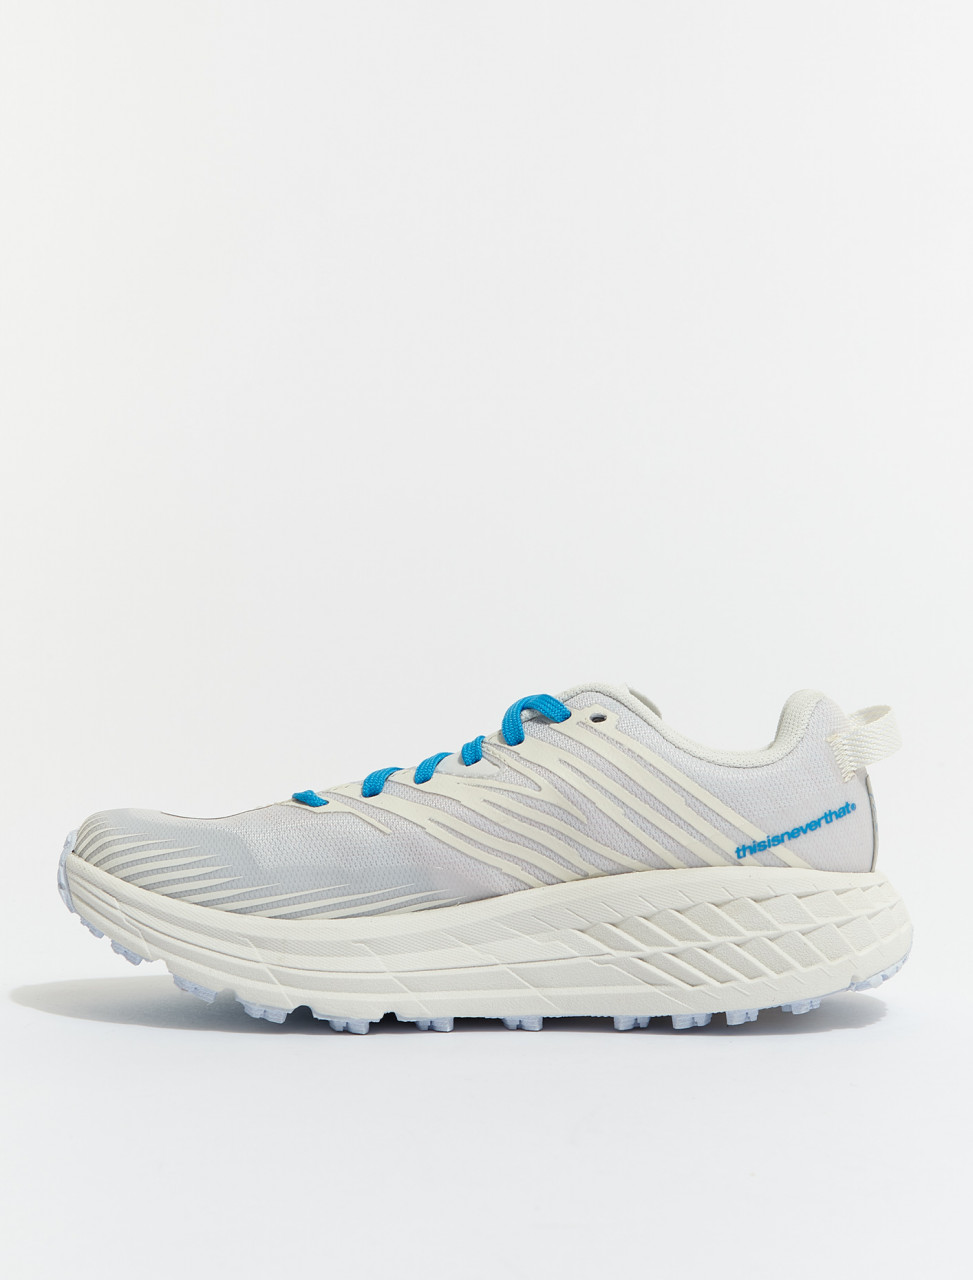 Hoka One One x thisisneverthat Speedgoat 4 in Marshmallow | Voo Store ...